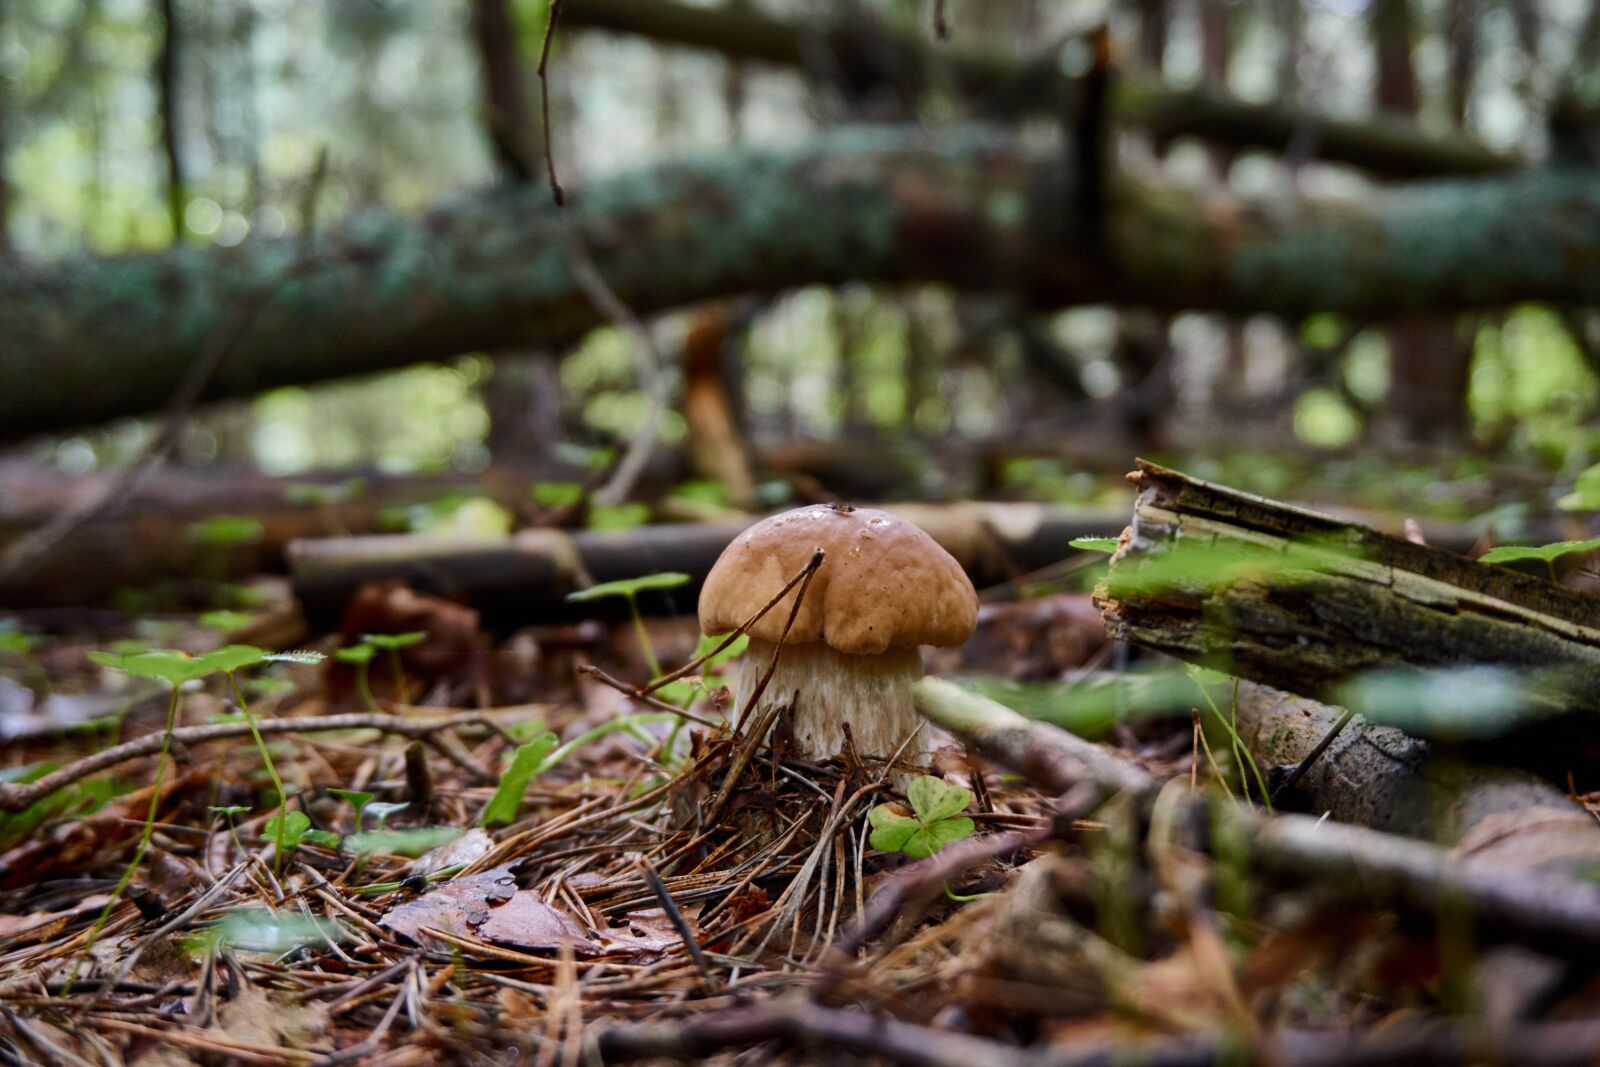 Sony a6000 sample photo. Mushroom, fores, summer photography